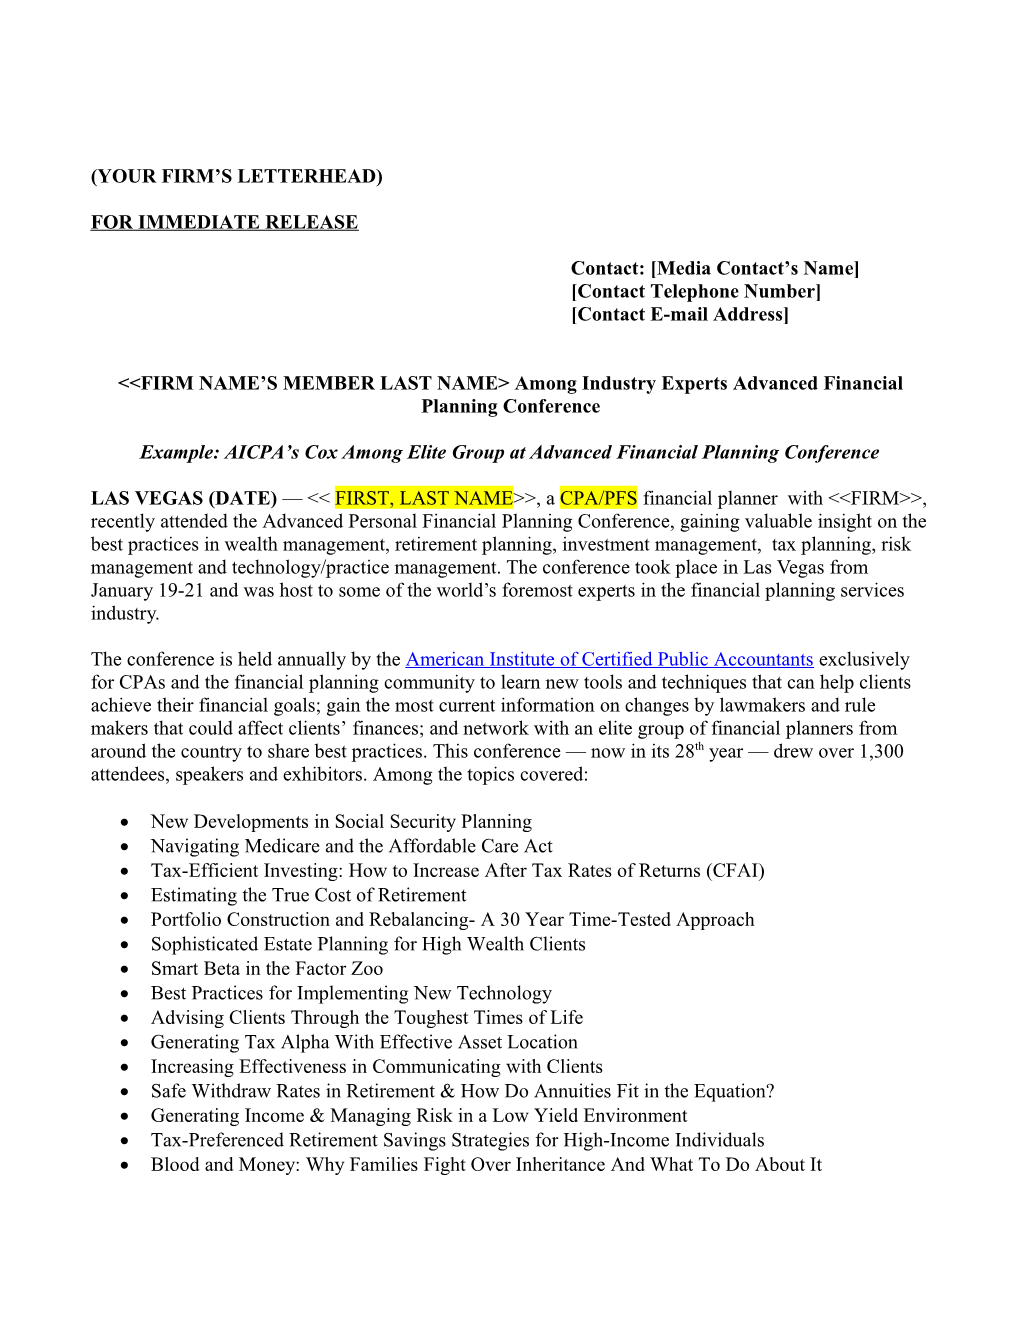 2015 PFP Conference Press Release Template